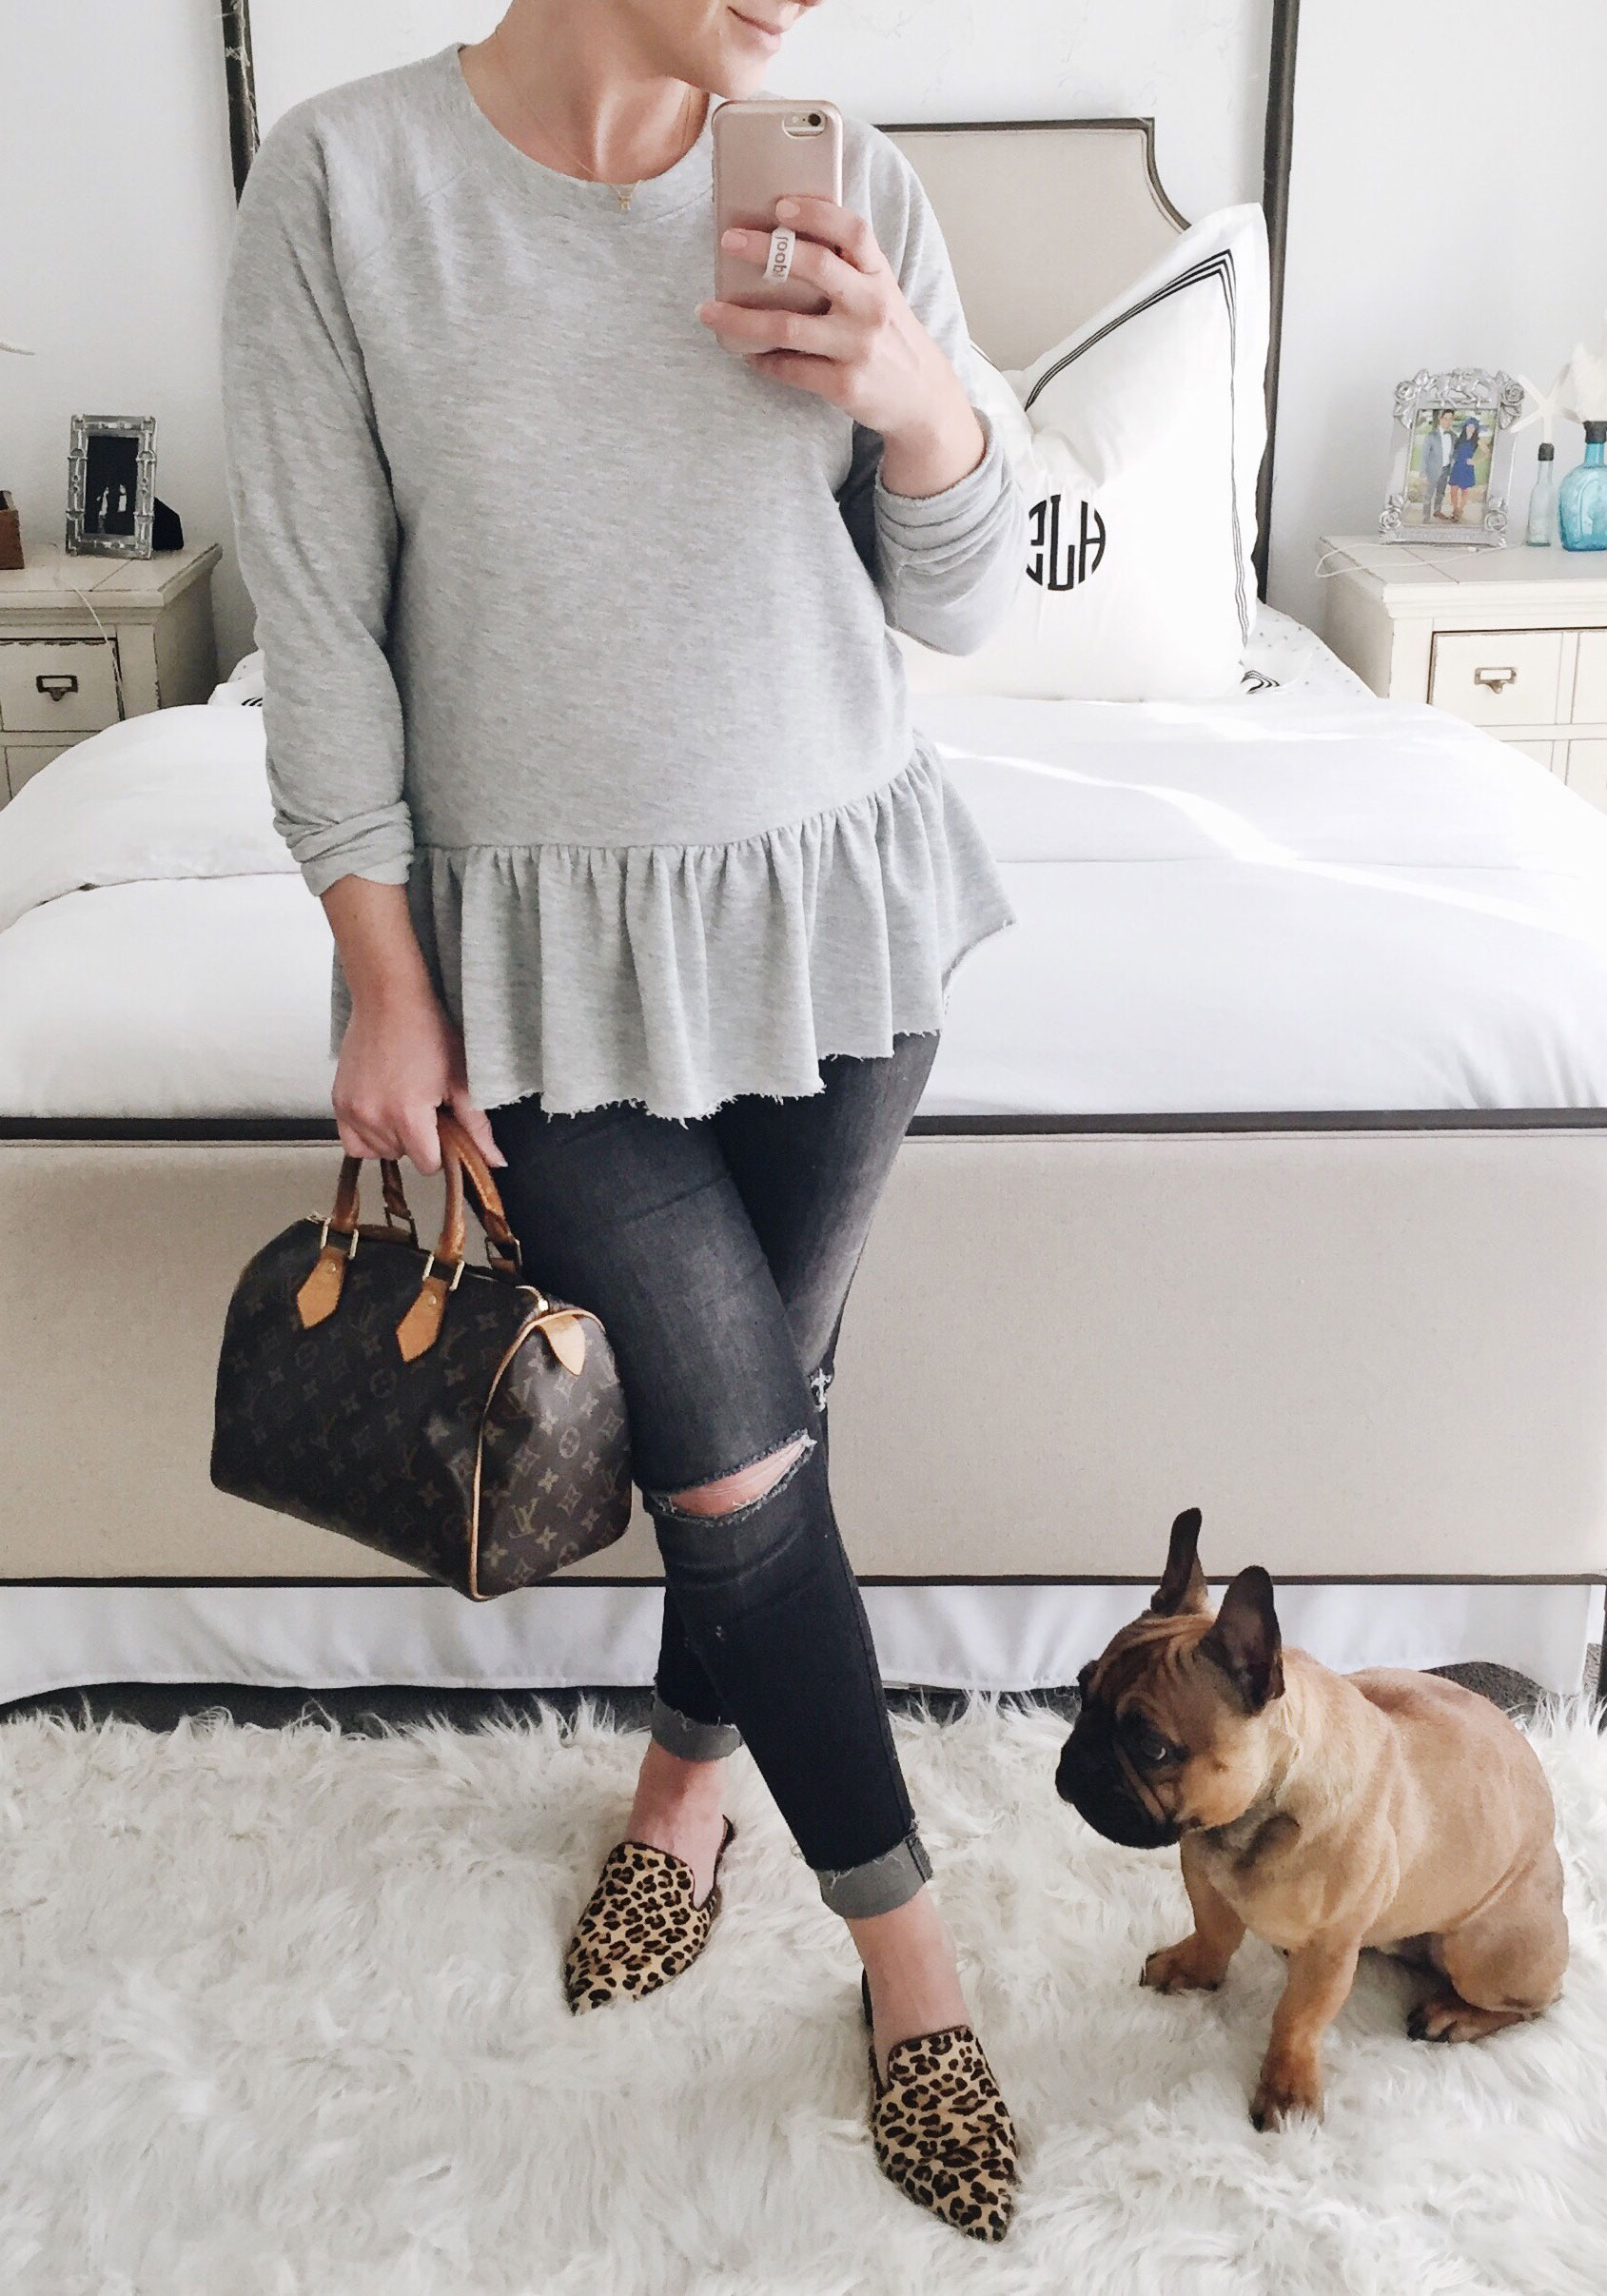 SECOND TRIMESTER LOOK BOOK & MATERNITY OUTFIT IDEAS — Me and Mr. Jones